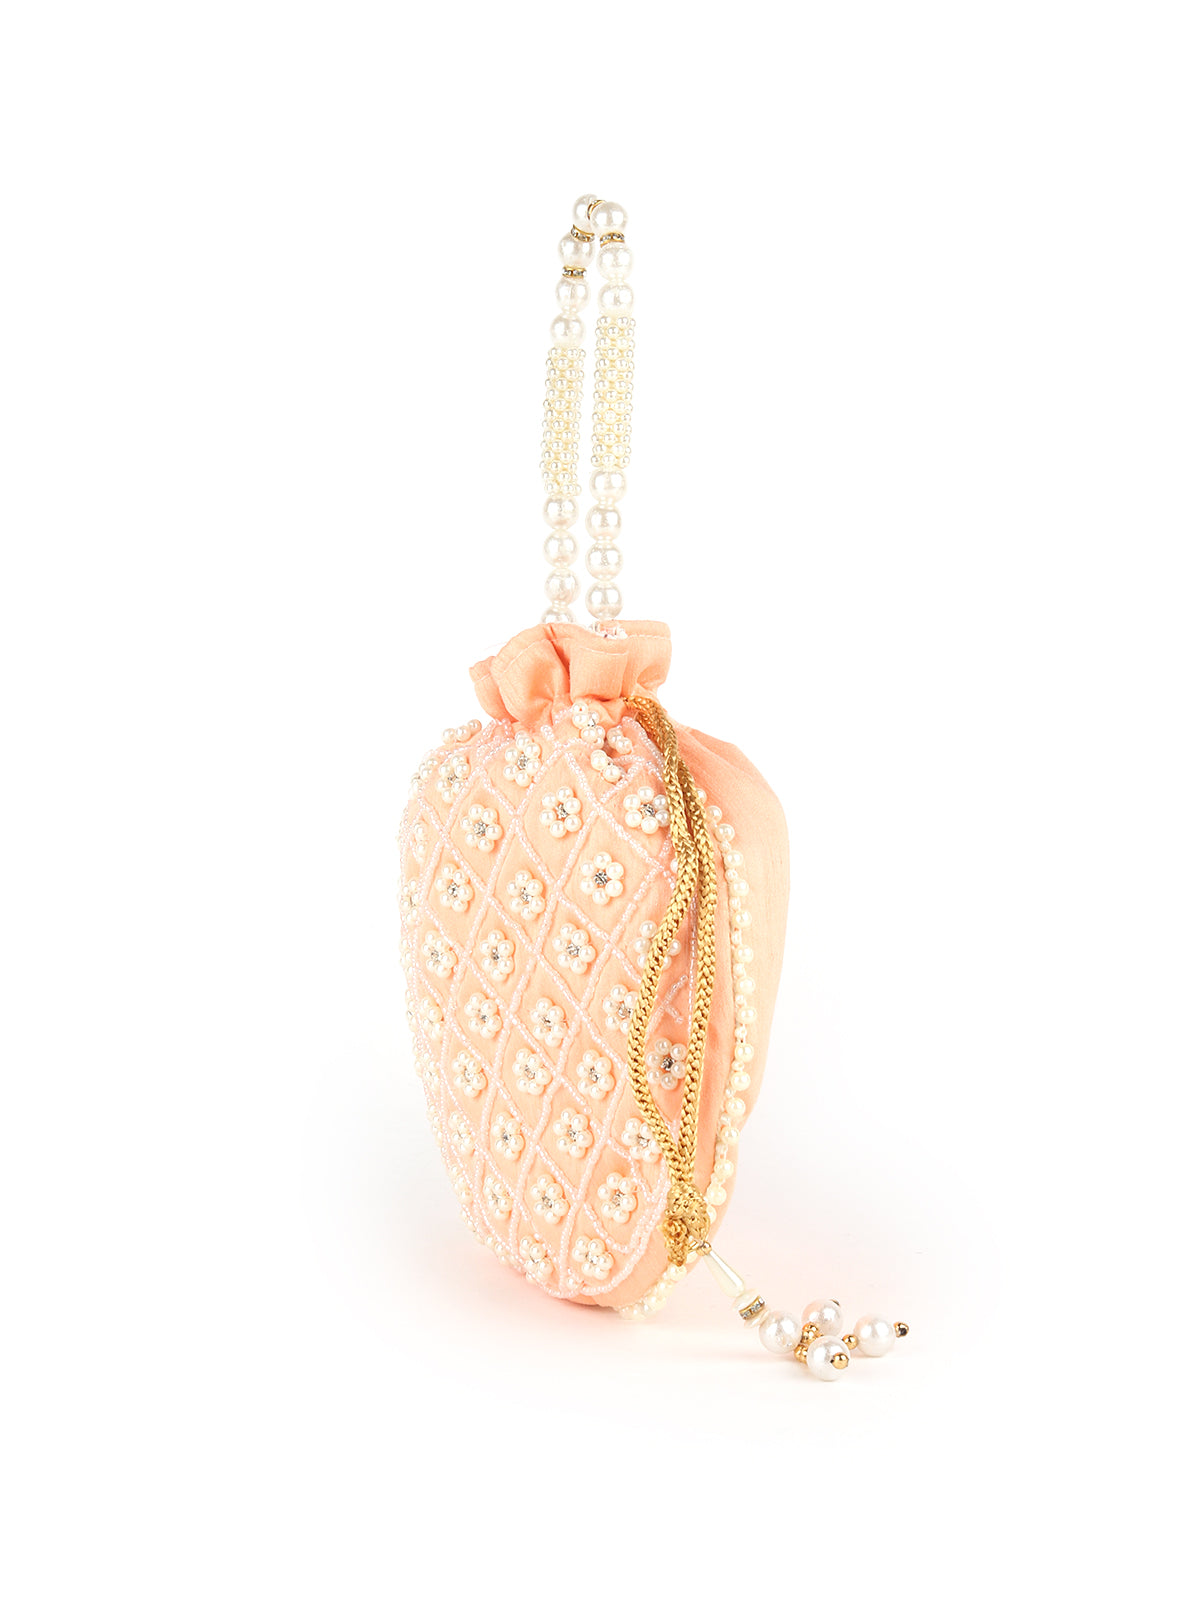 Odette Peach Pearl Embroidered Potli Bag for Women